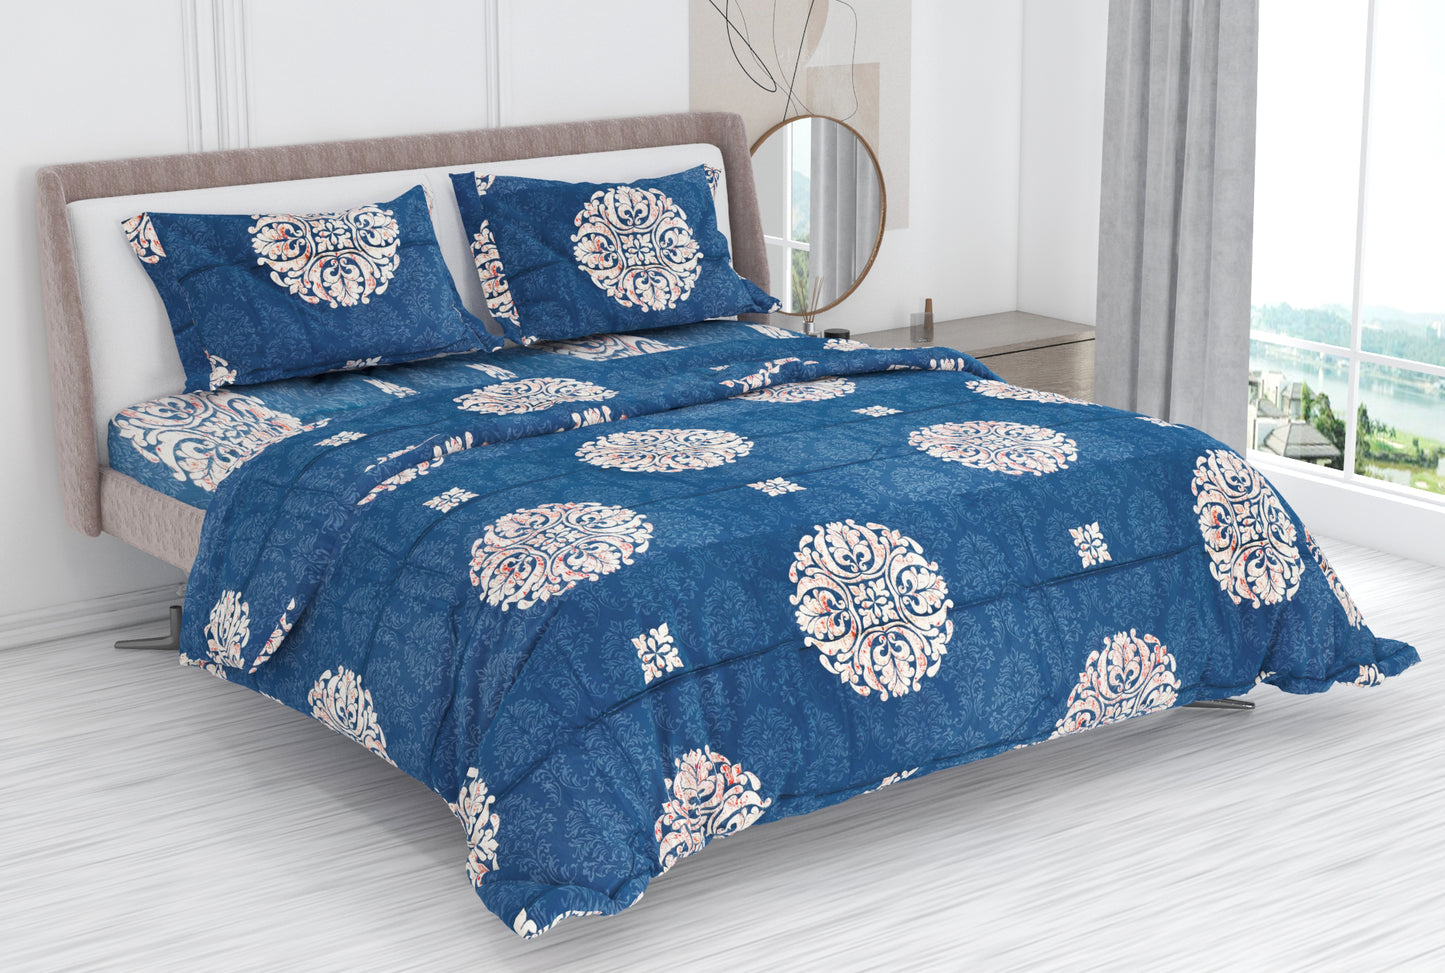 Premium Cotton King Size Double Bed Bedsheet With 2 Pillow Covers-Navy Blue